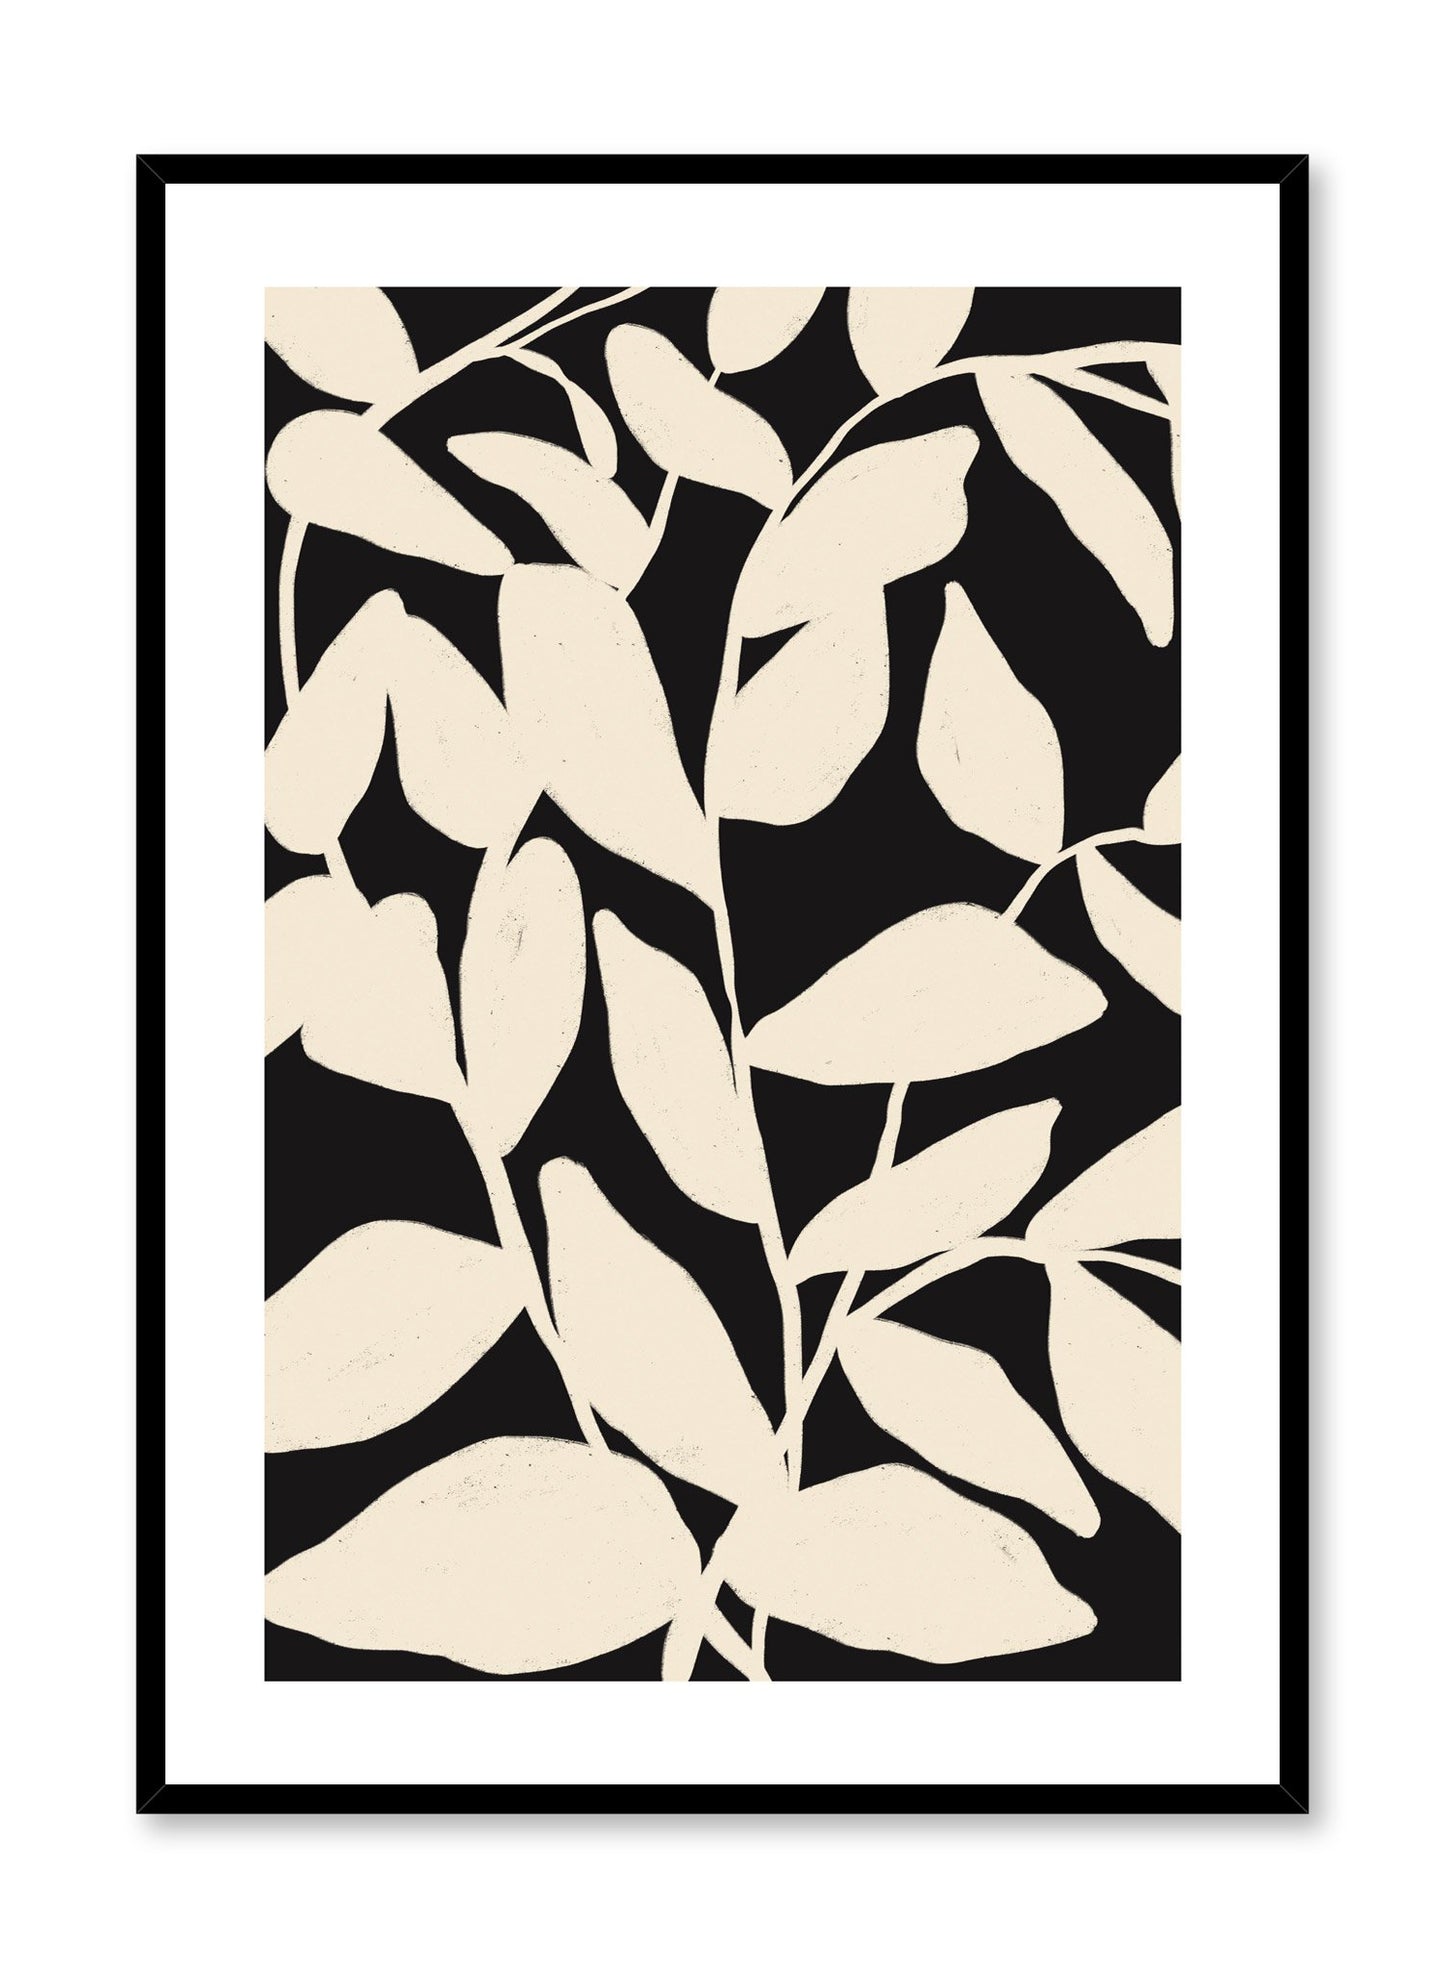 "Leaf Choreography" is a minimalist illustration poster by Opposite Wall in black and beige of abstract beige leaves entangled over a black background inspired by French painter Henri Matisse. 